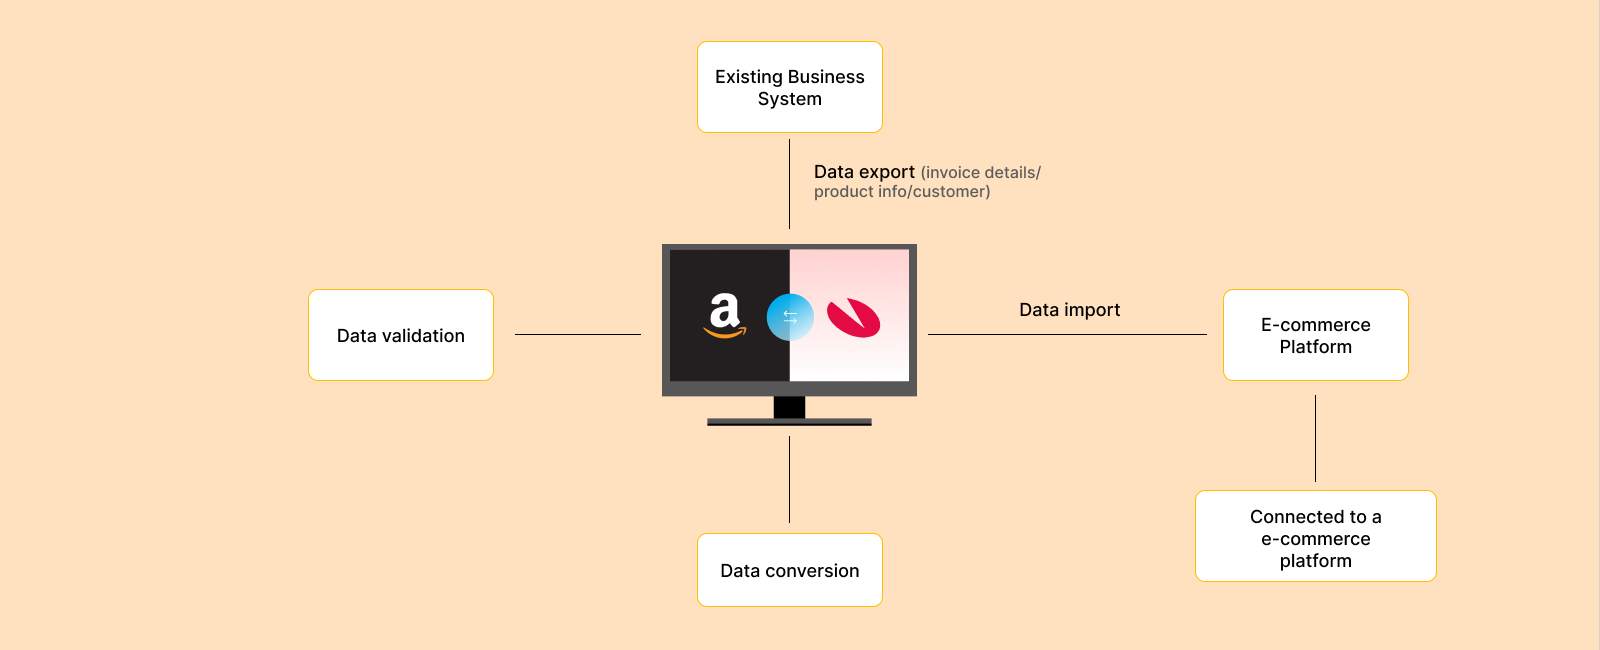 image-flow-of-data-amazon-integration.png